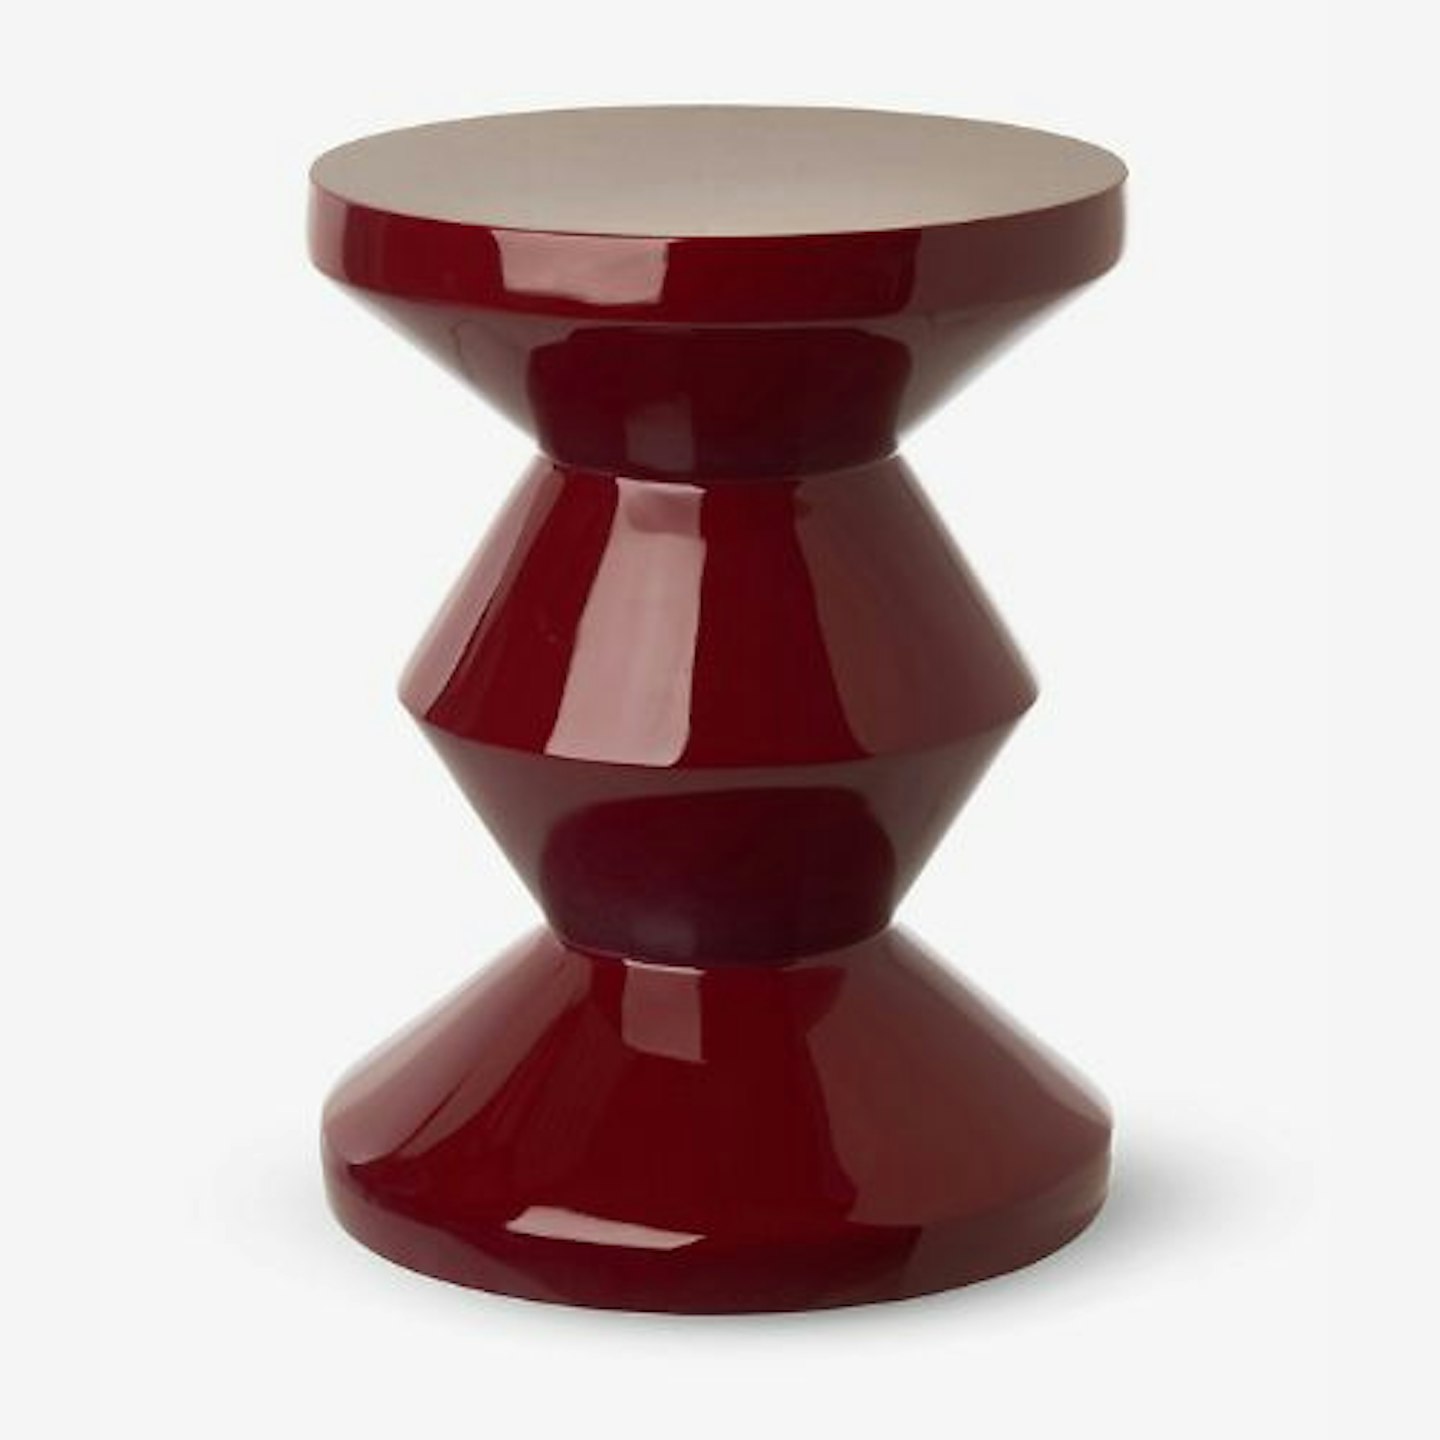 Pols Potten Zig Zag Lacquered Stool in Red